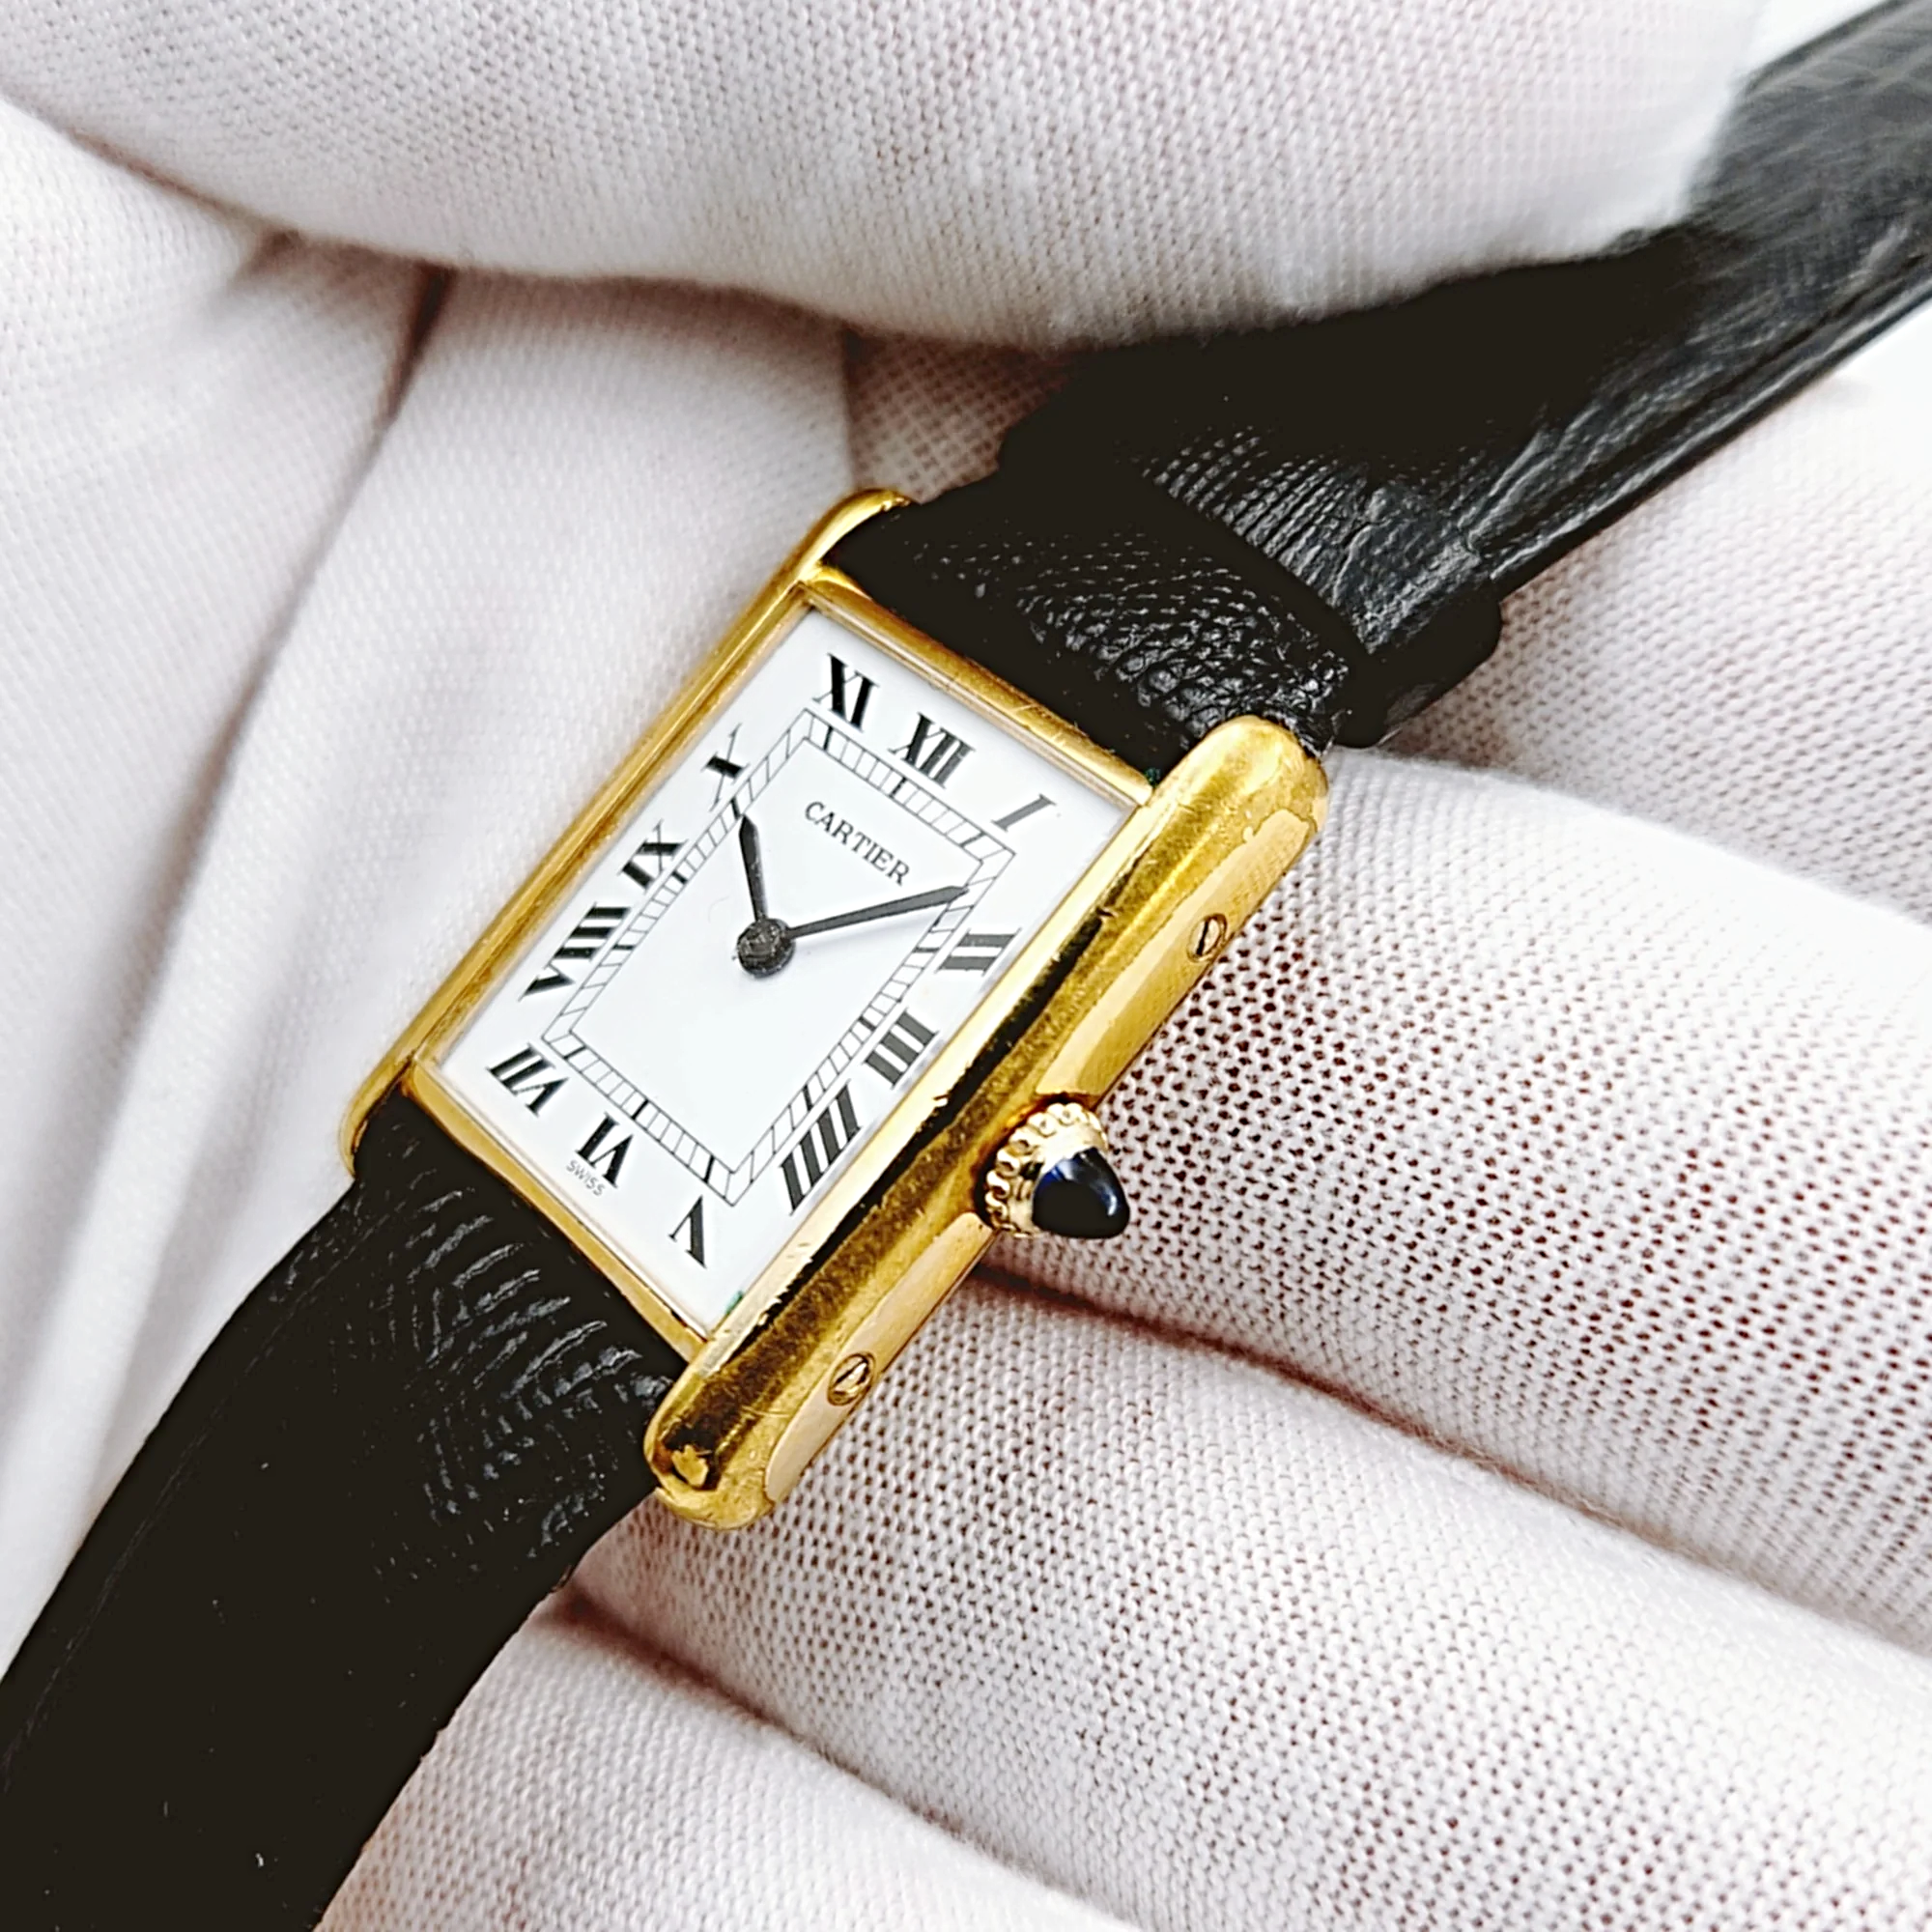 Ladies Cartier Tank Automatic Vintage 18K Electroplated Watch with White Roman Numeral Dial and Black Leather Band. (Pre-Owned)